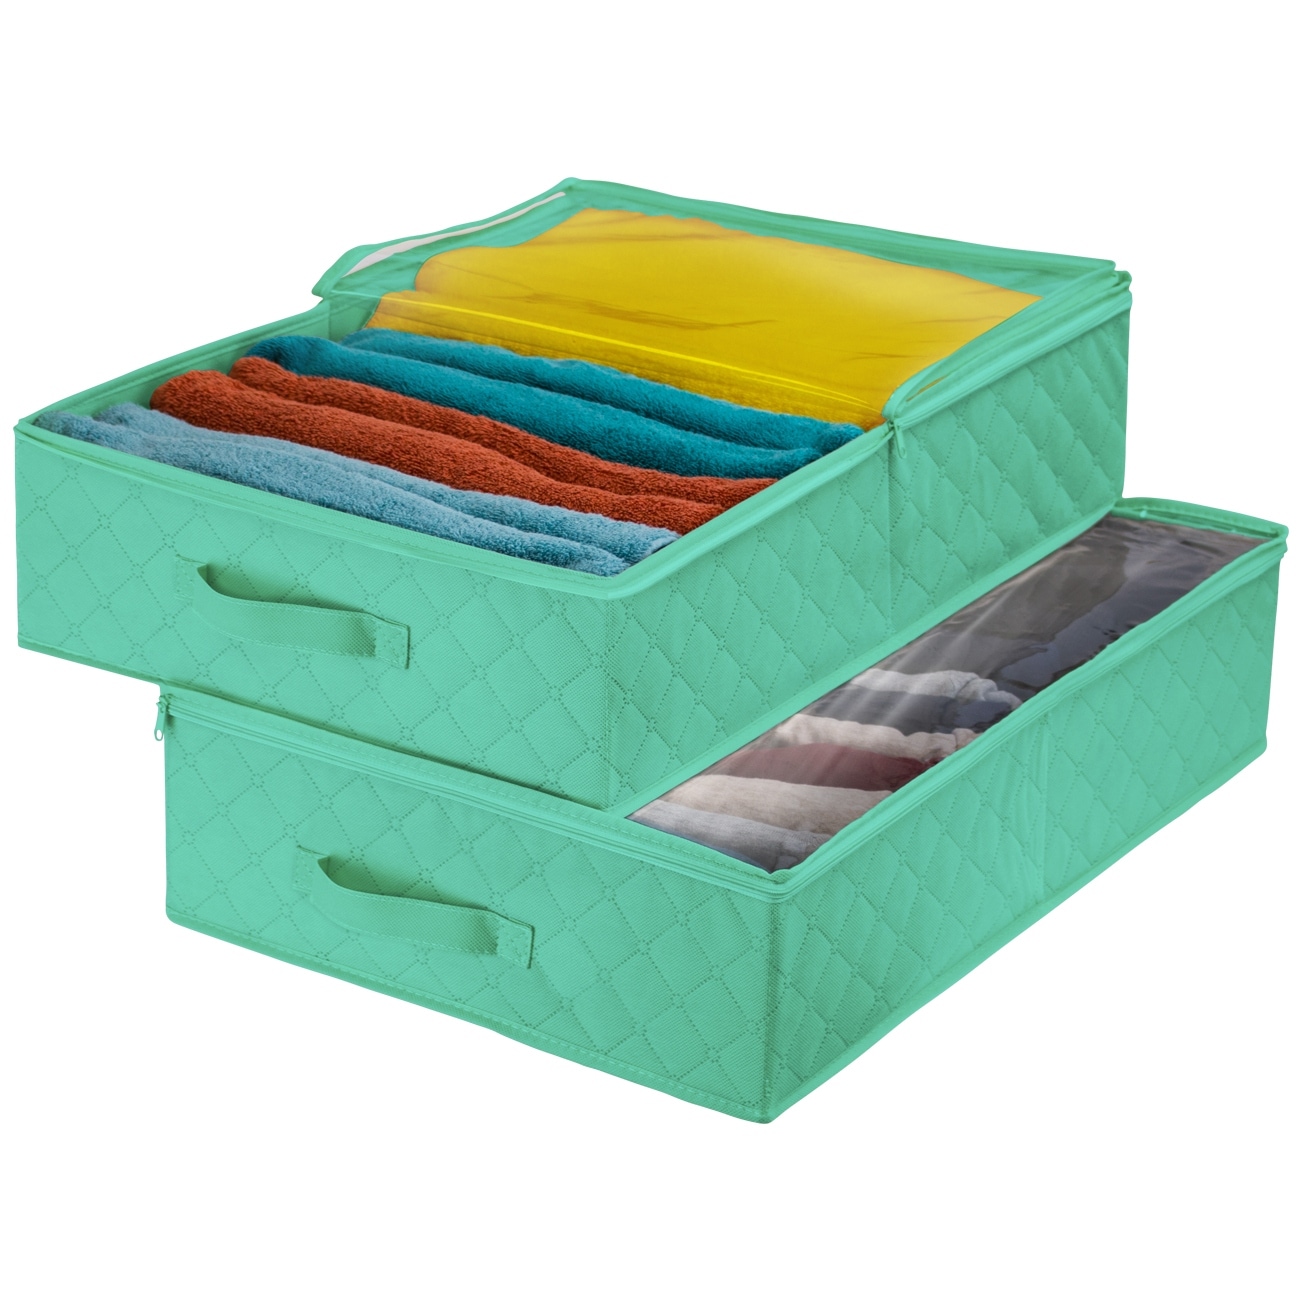  Simplify 3 Compartment Organizer with Bamboo Lid